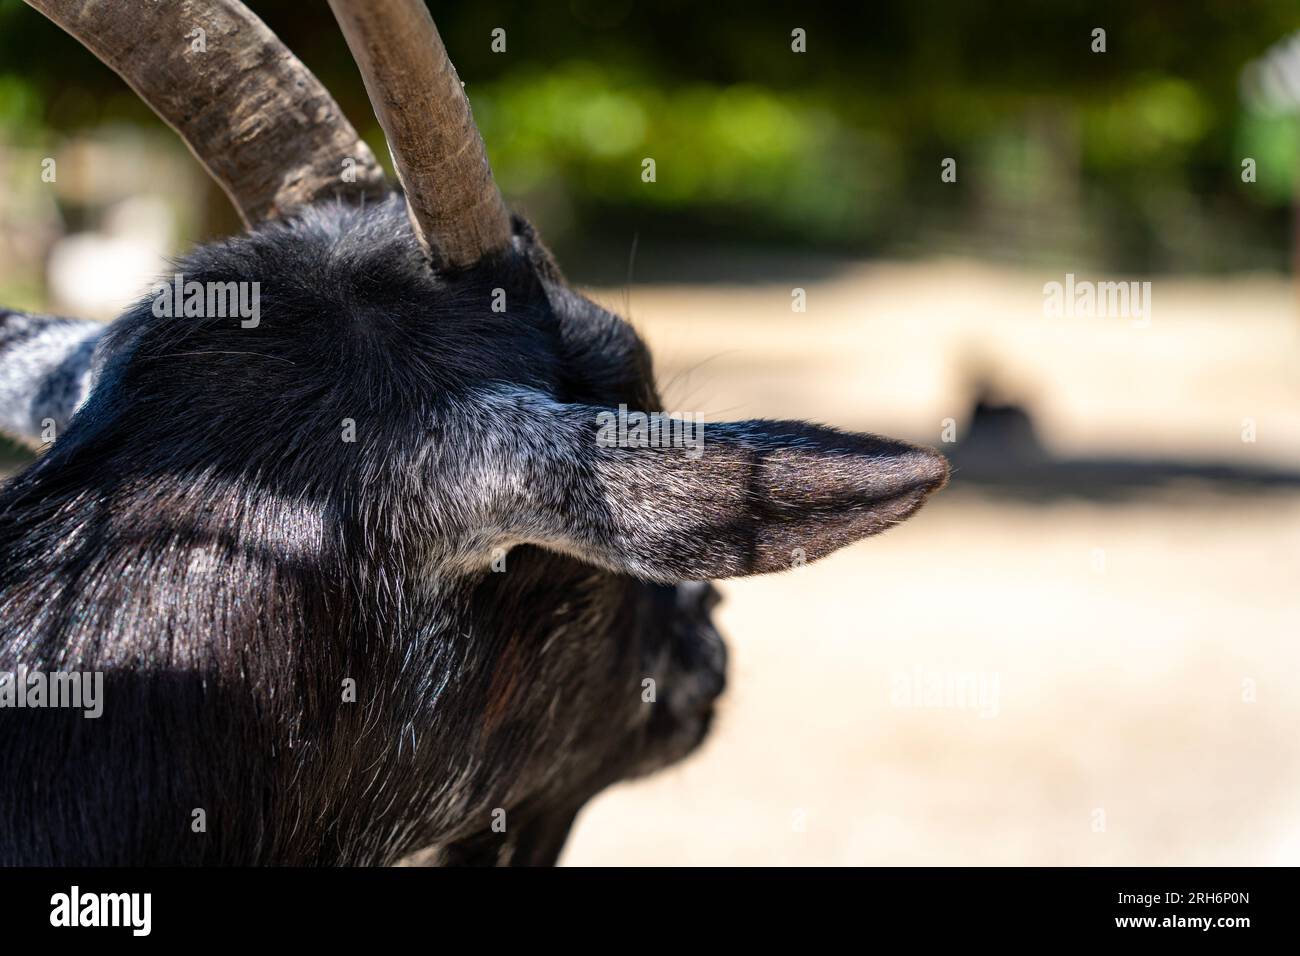 Head of pygmy goat with black fur Stock Photo